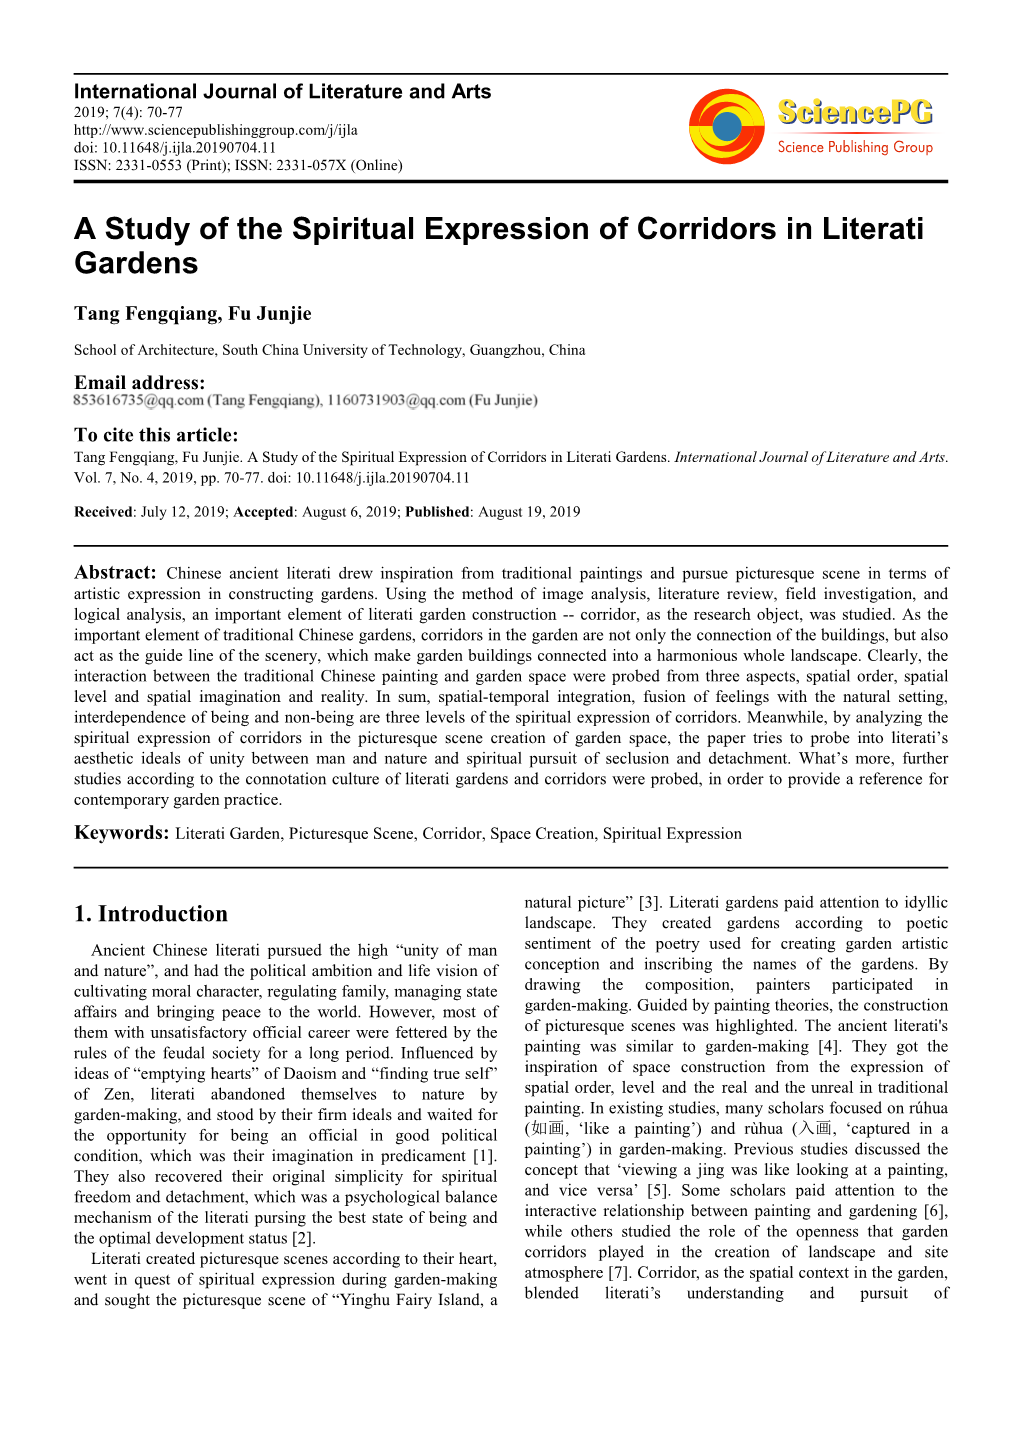 A Study of the Spiritual Expression of Corridors in Literati Gardens